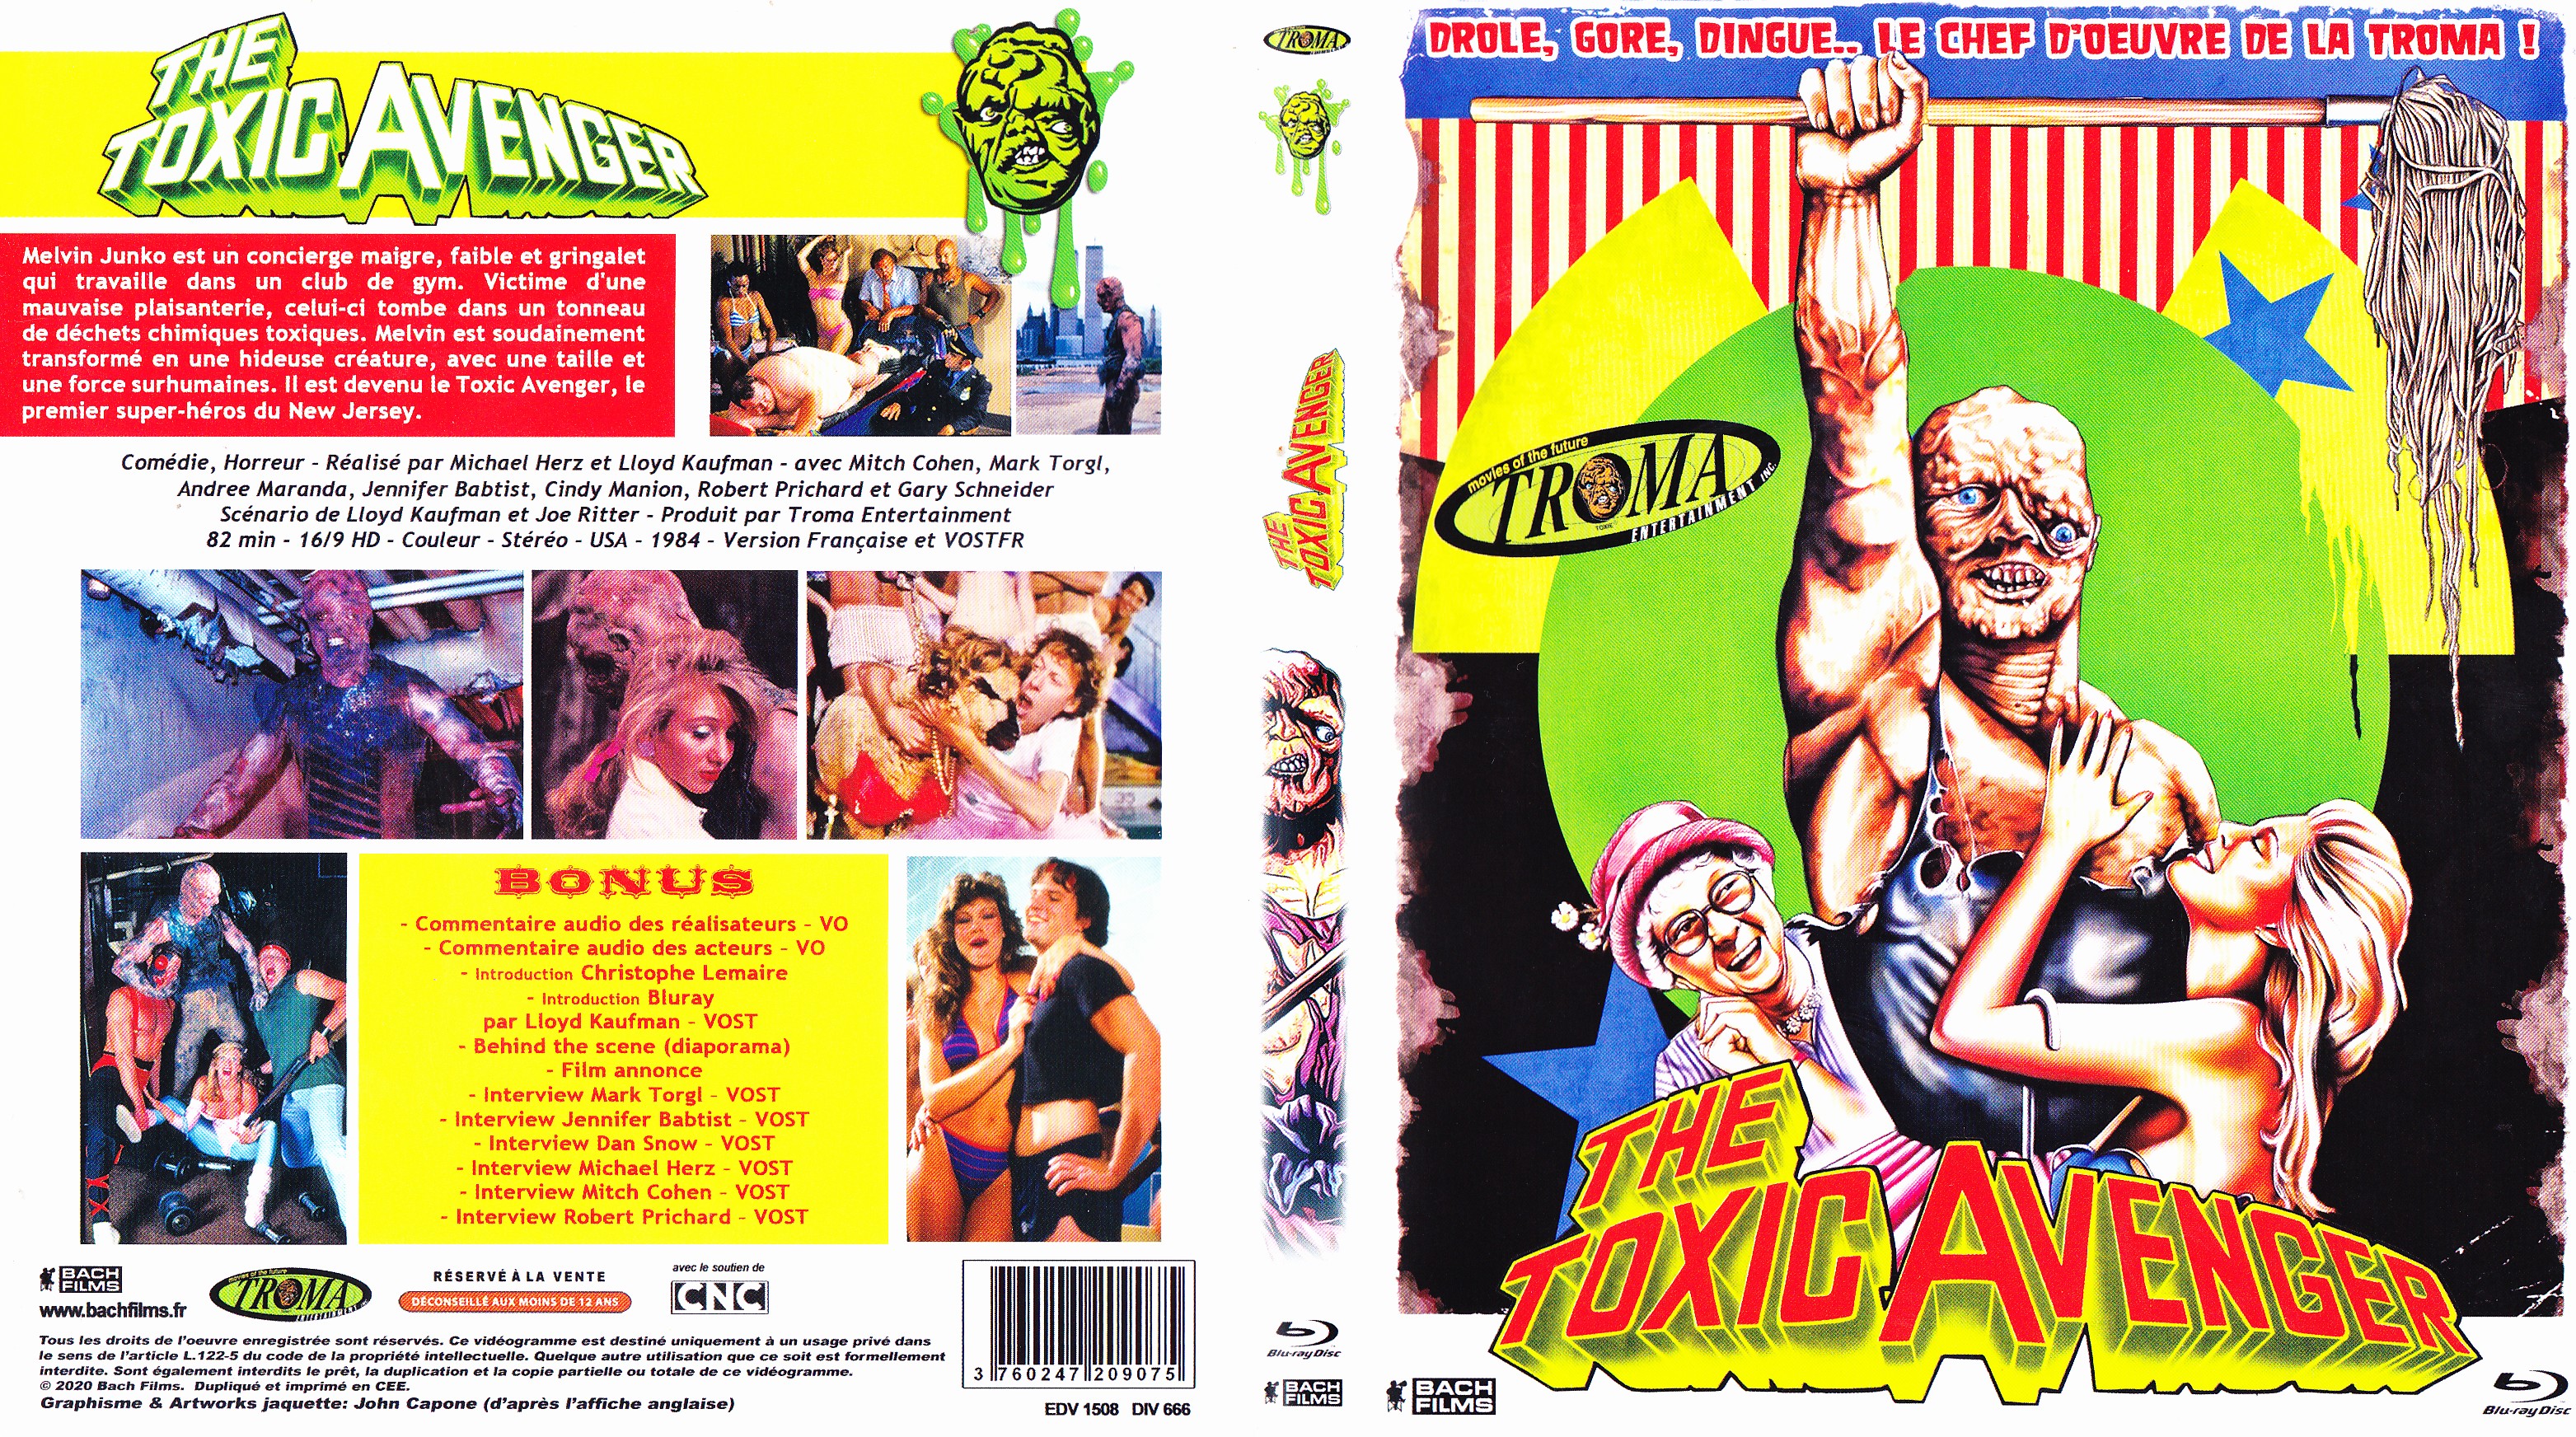 Jaquette DVD The toxic avenger (BLU-RAY)